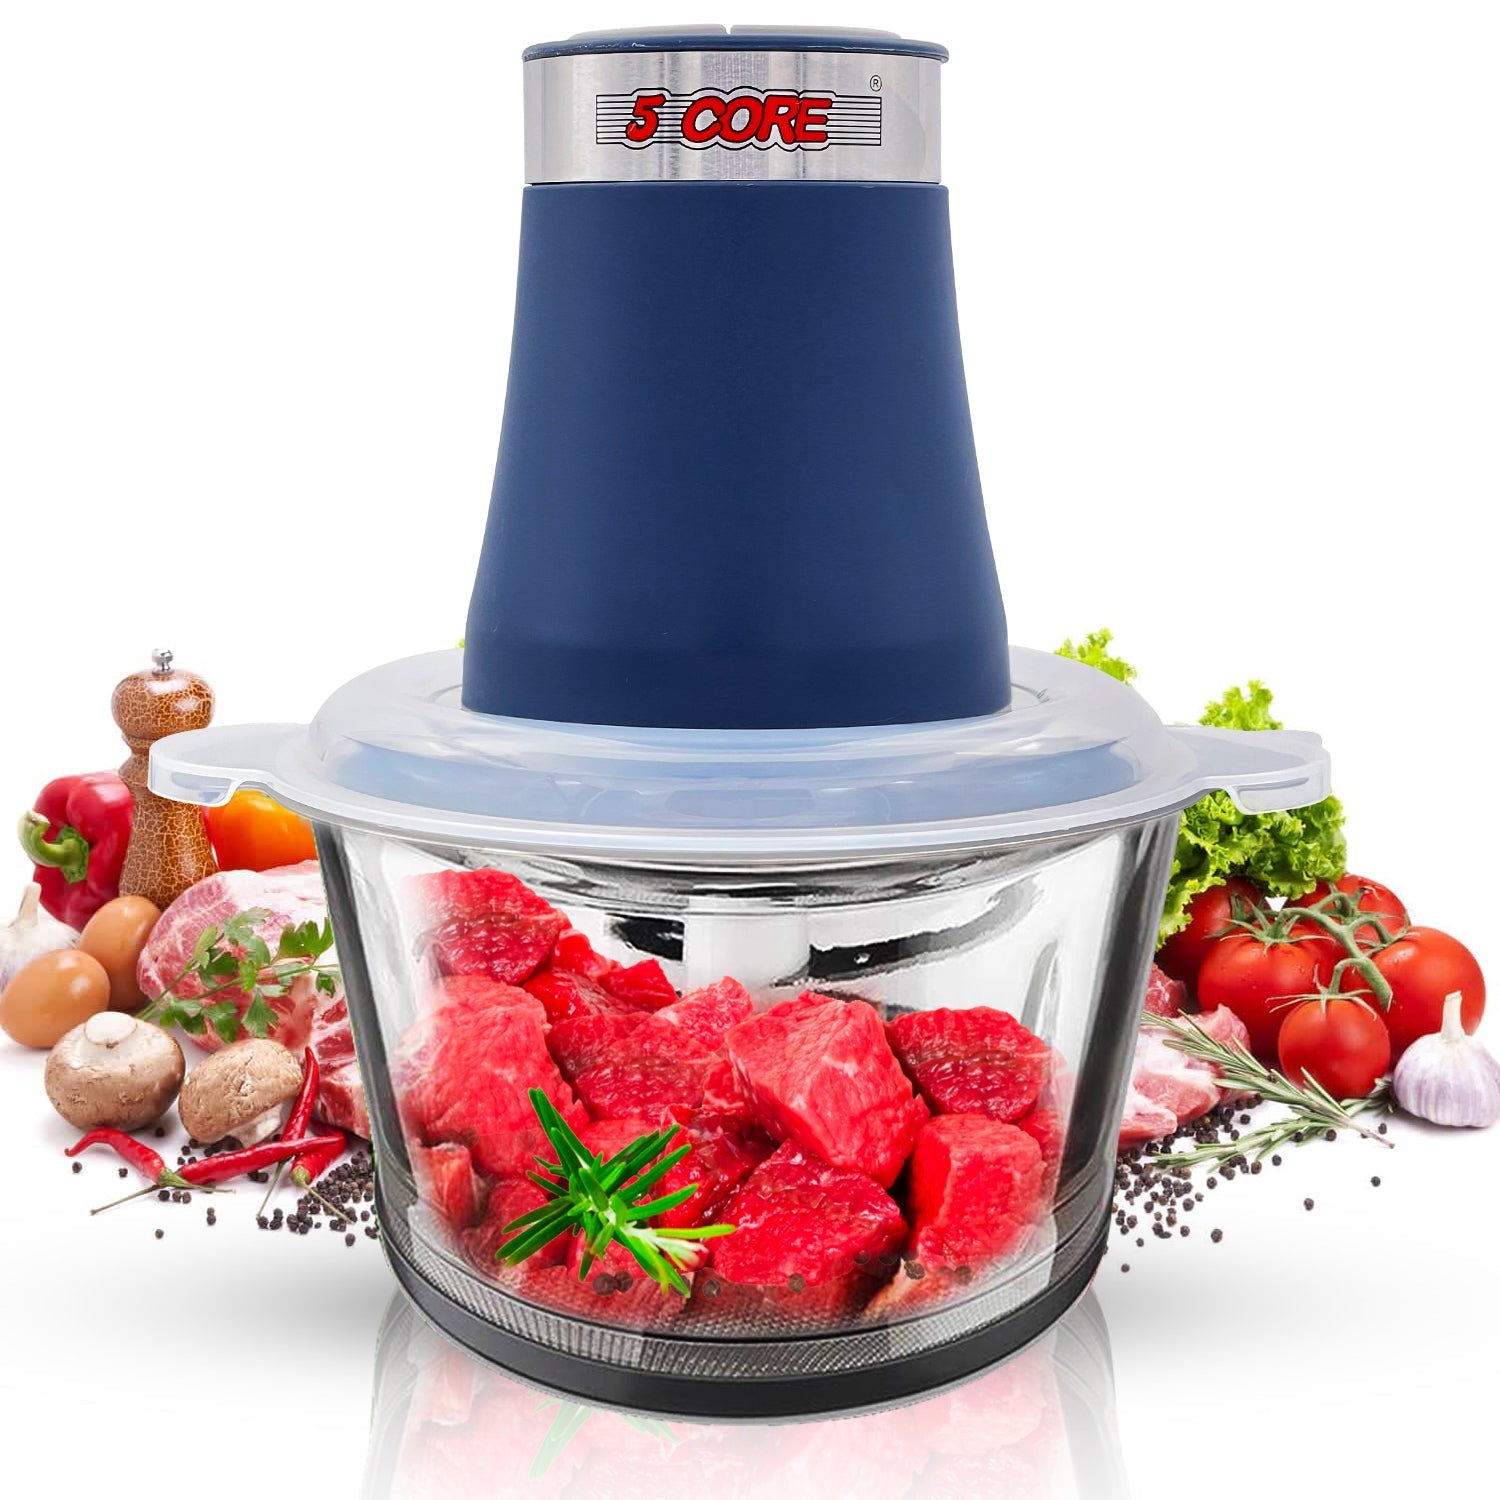 5 Core Food Processor 300W Motor, Electric Chopper Heavy Duty Meat Grinder 12 Cup 4 Titanium Blades, 2L Glass Bowl With 2 Speed for Vegetables Fruits Nuts Lean Ground Meat MG S GB